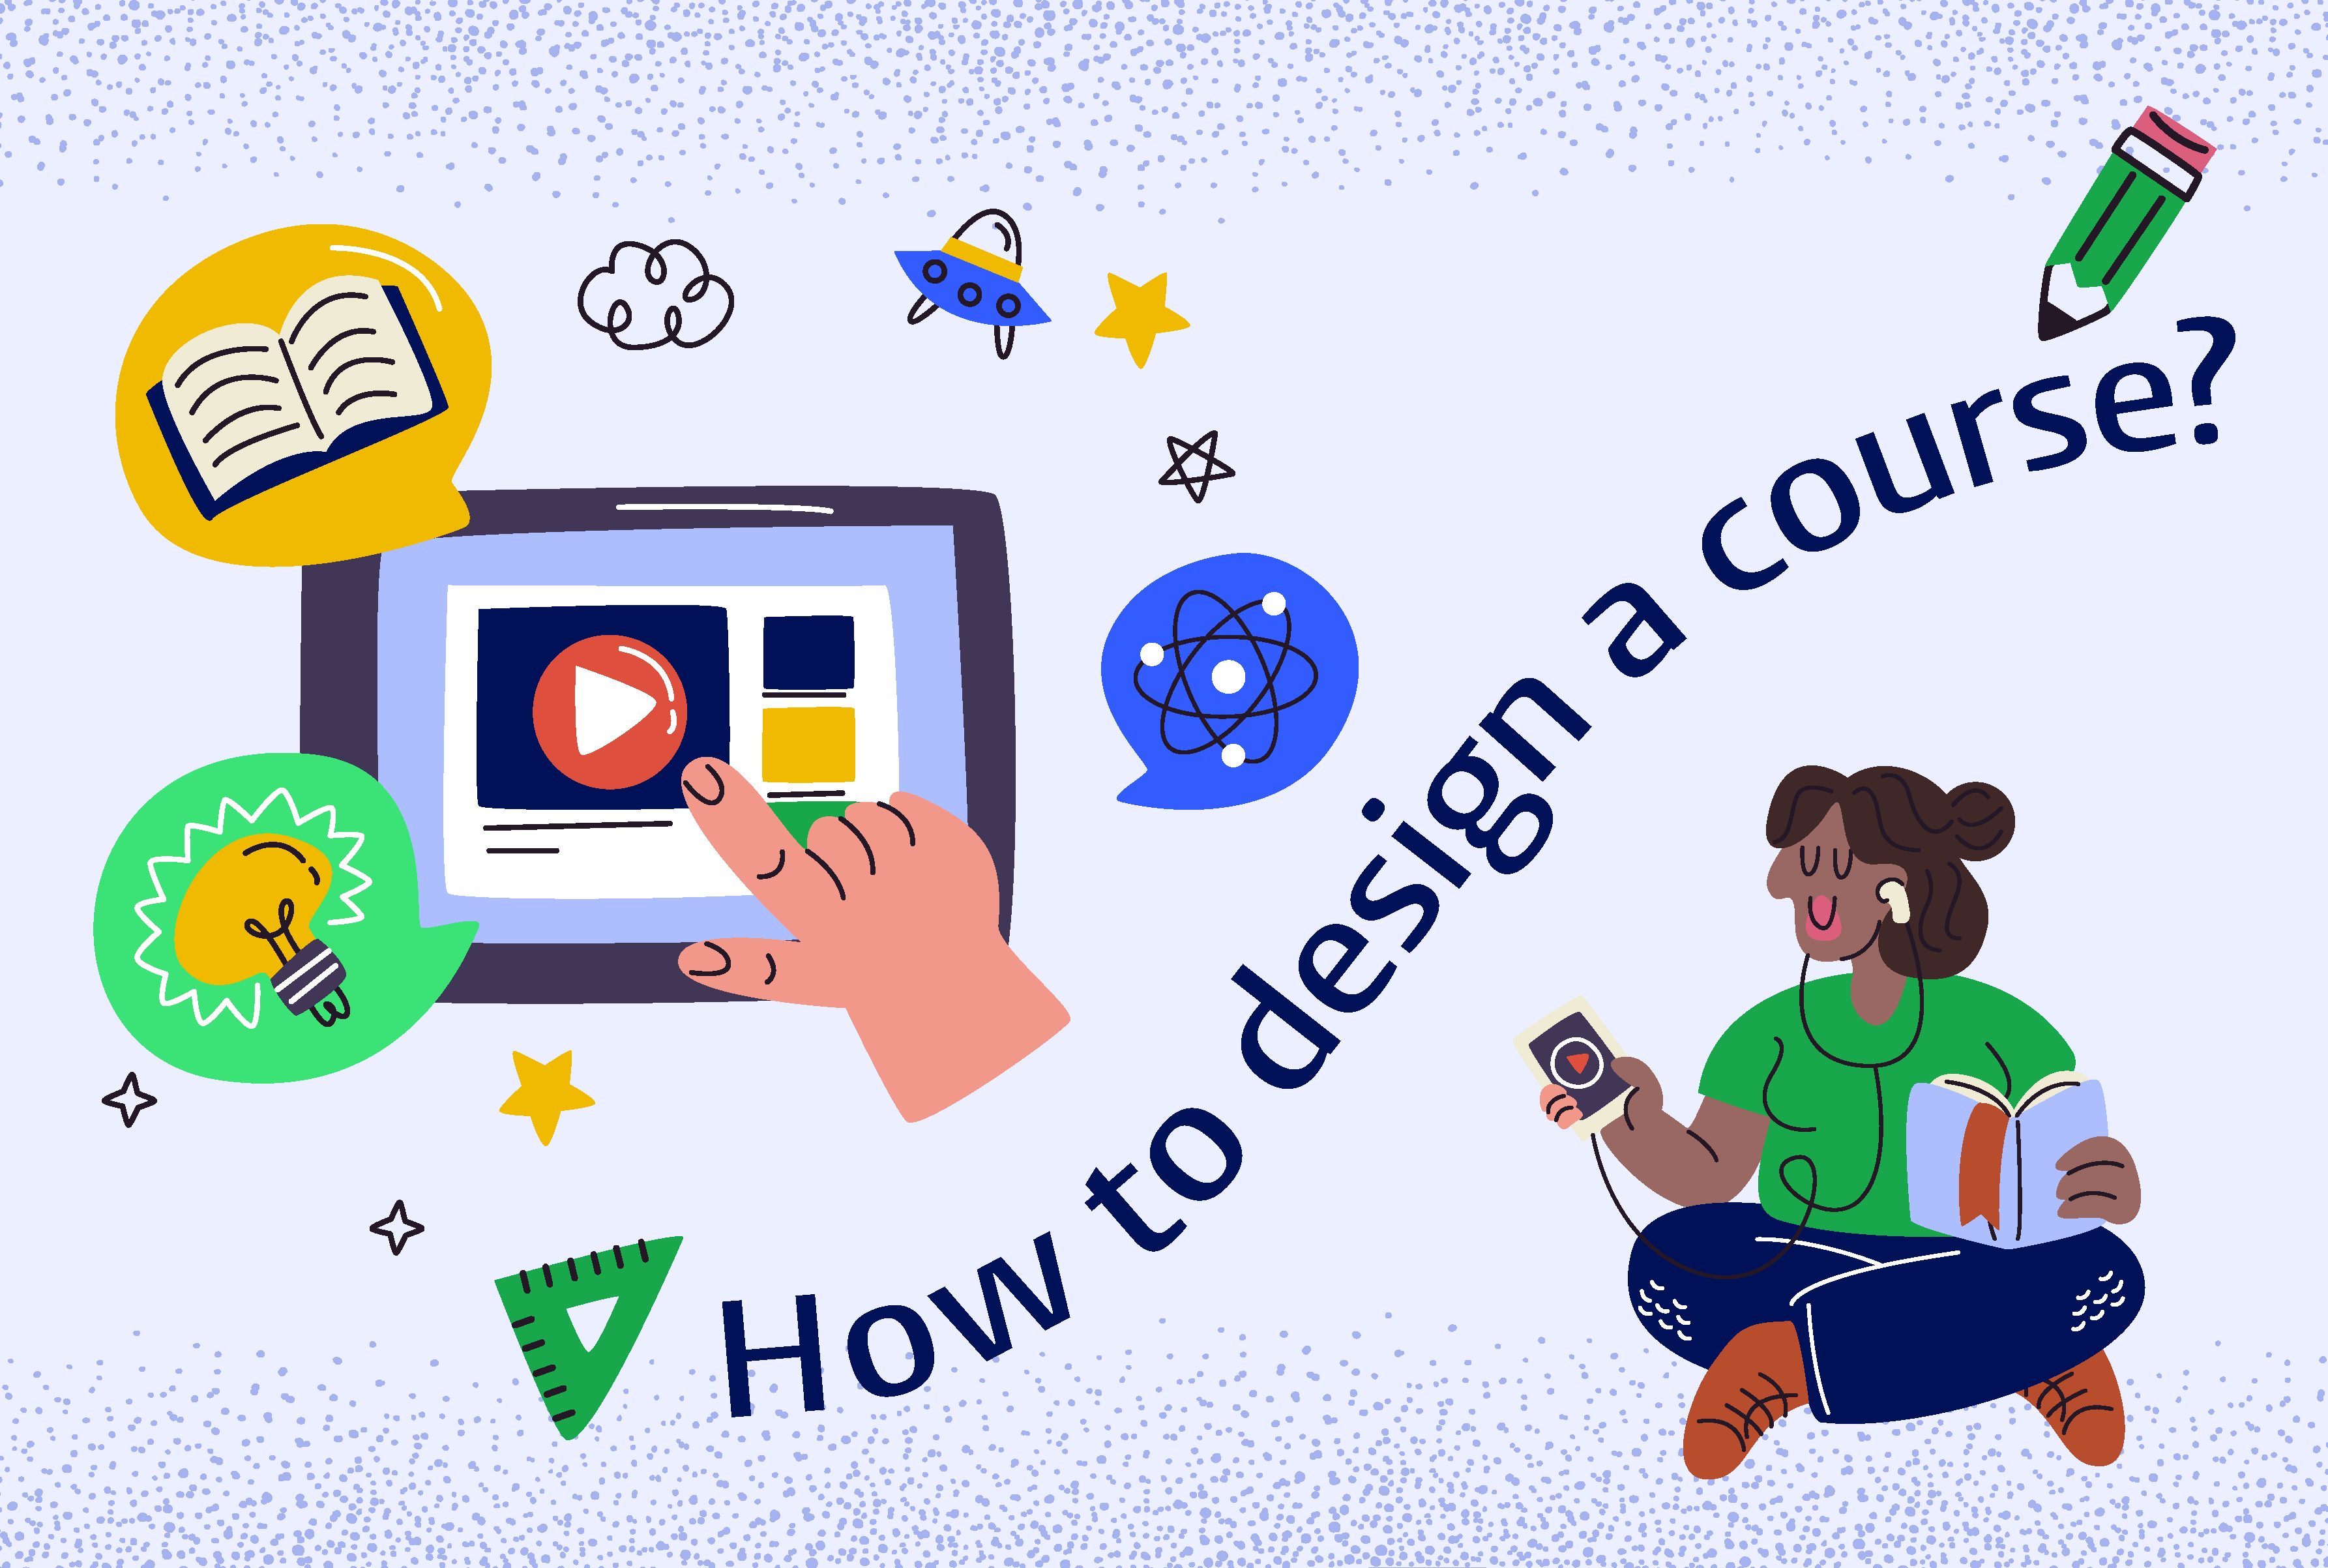 How to Design a Course: Let’s Practice What We Preach!